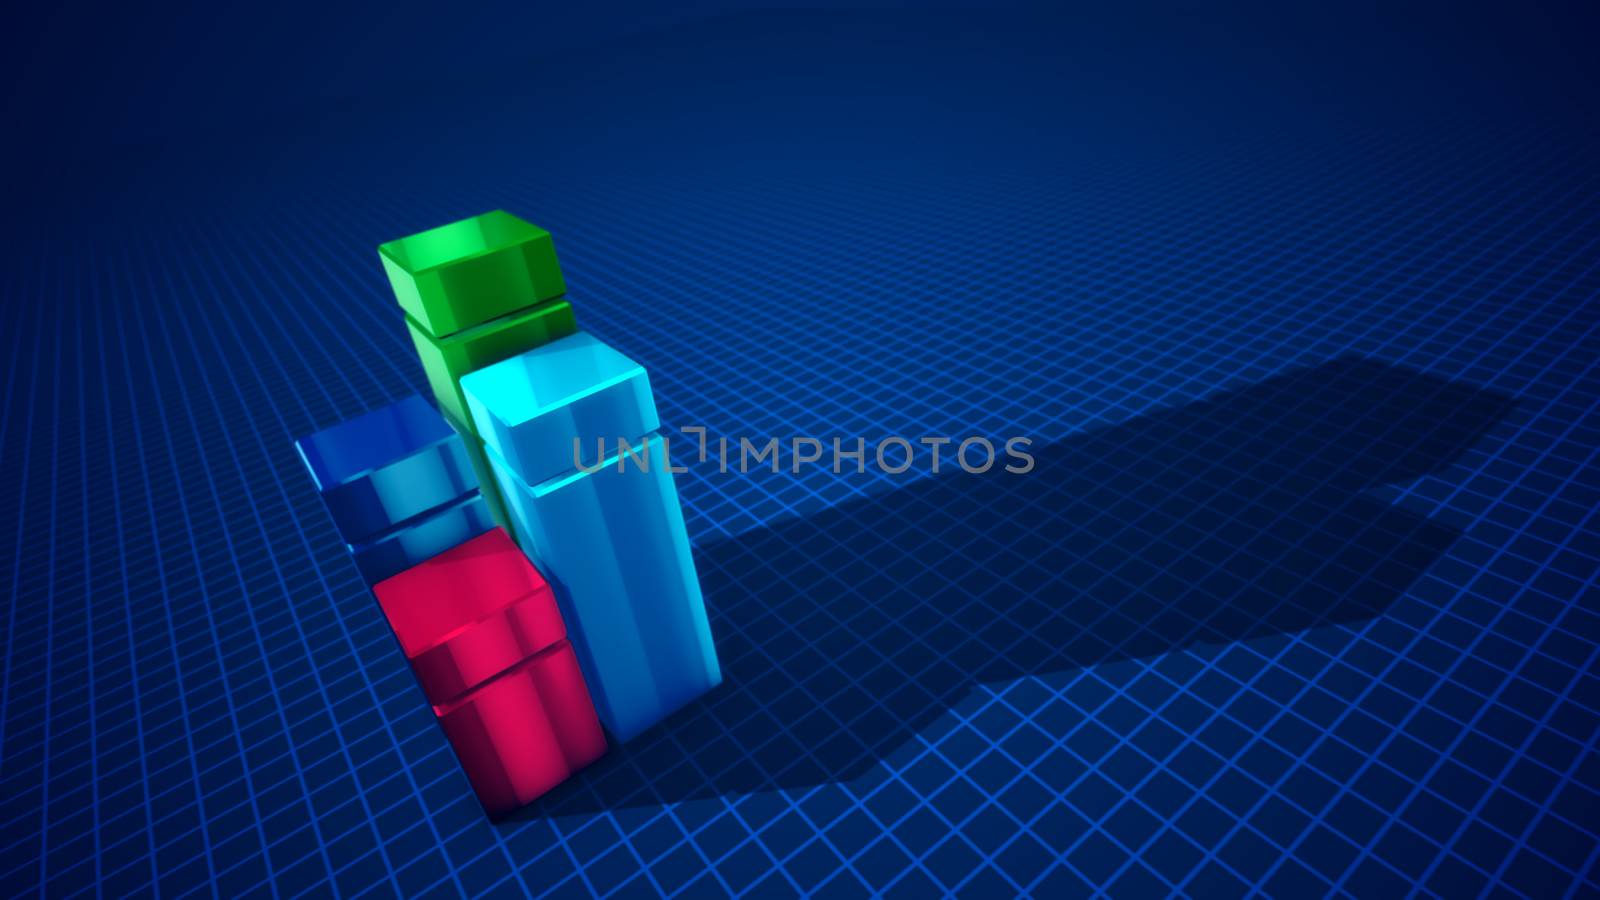 Multilayered 3d illustration of four cubic columns of blue, green, celeste and rosy colors forming a chart in the blue background with network put askew. It looks businesslike and optimistic.